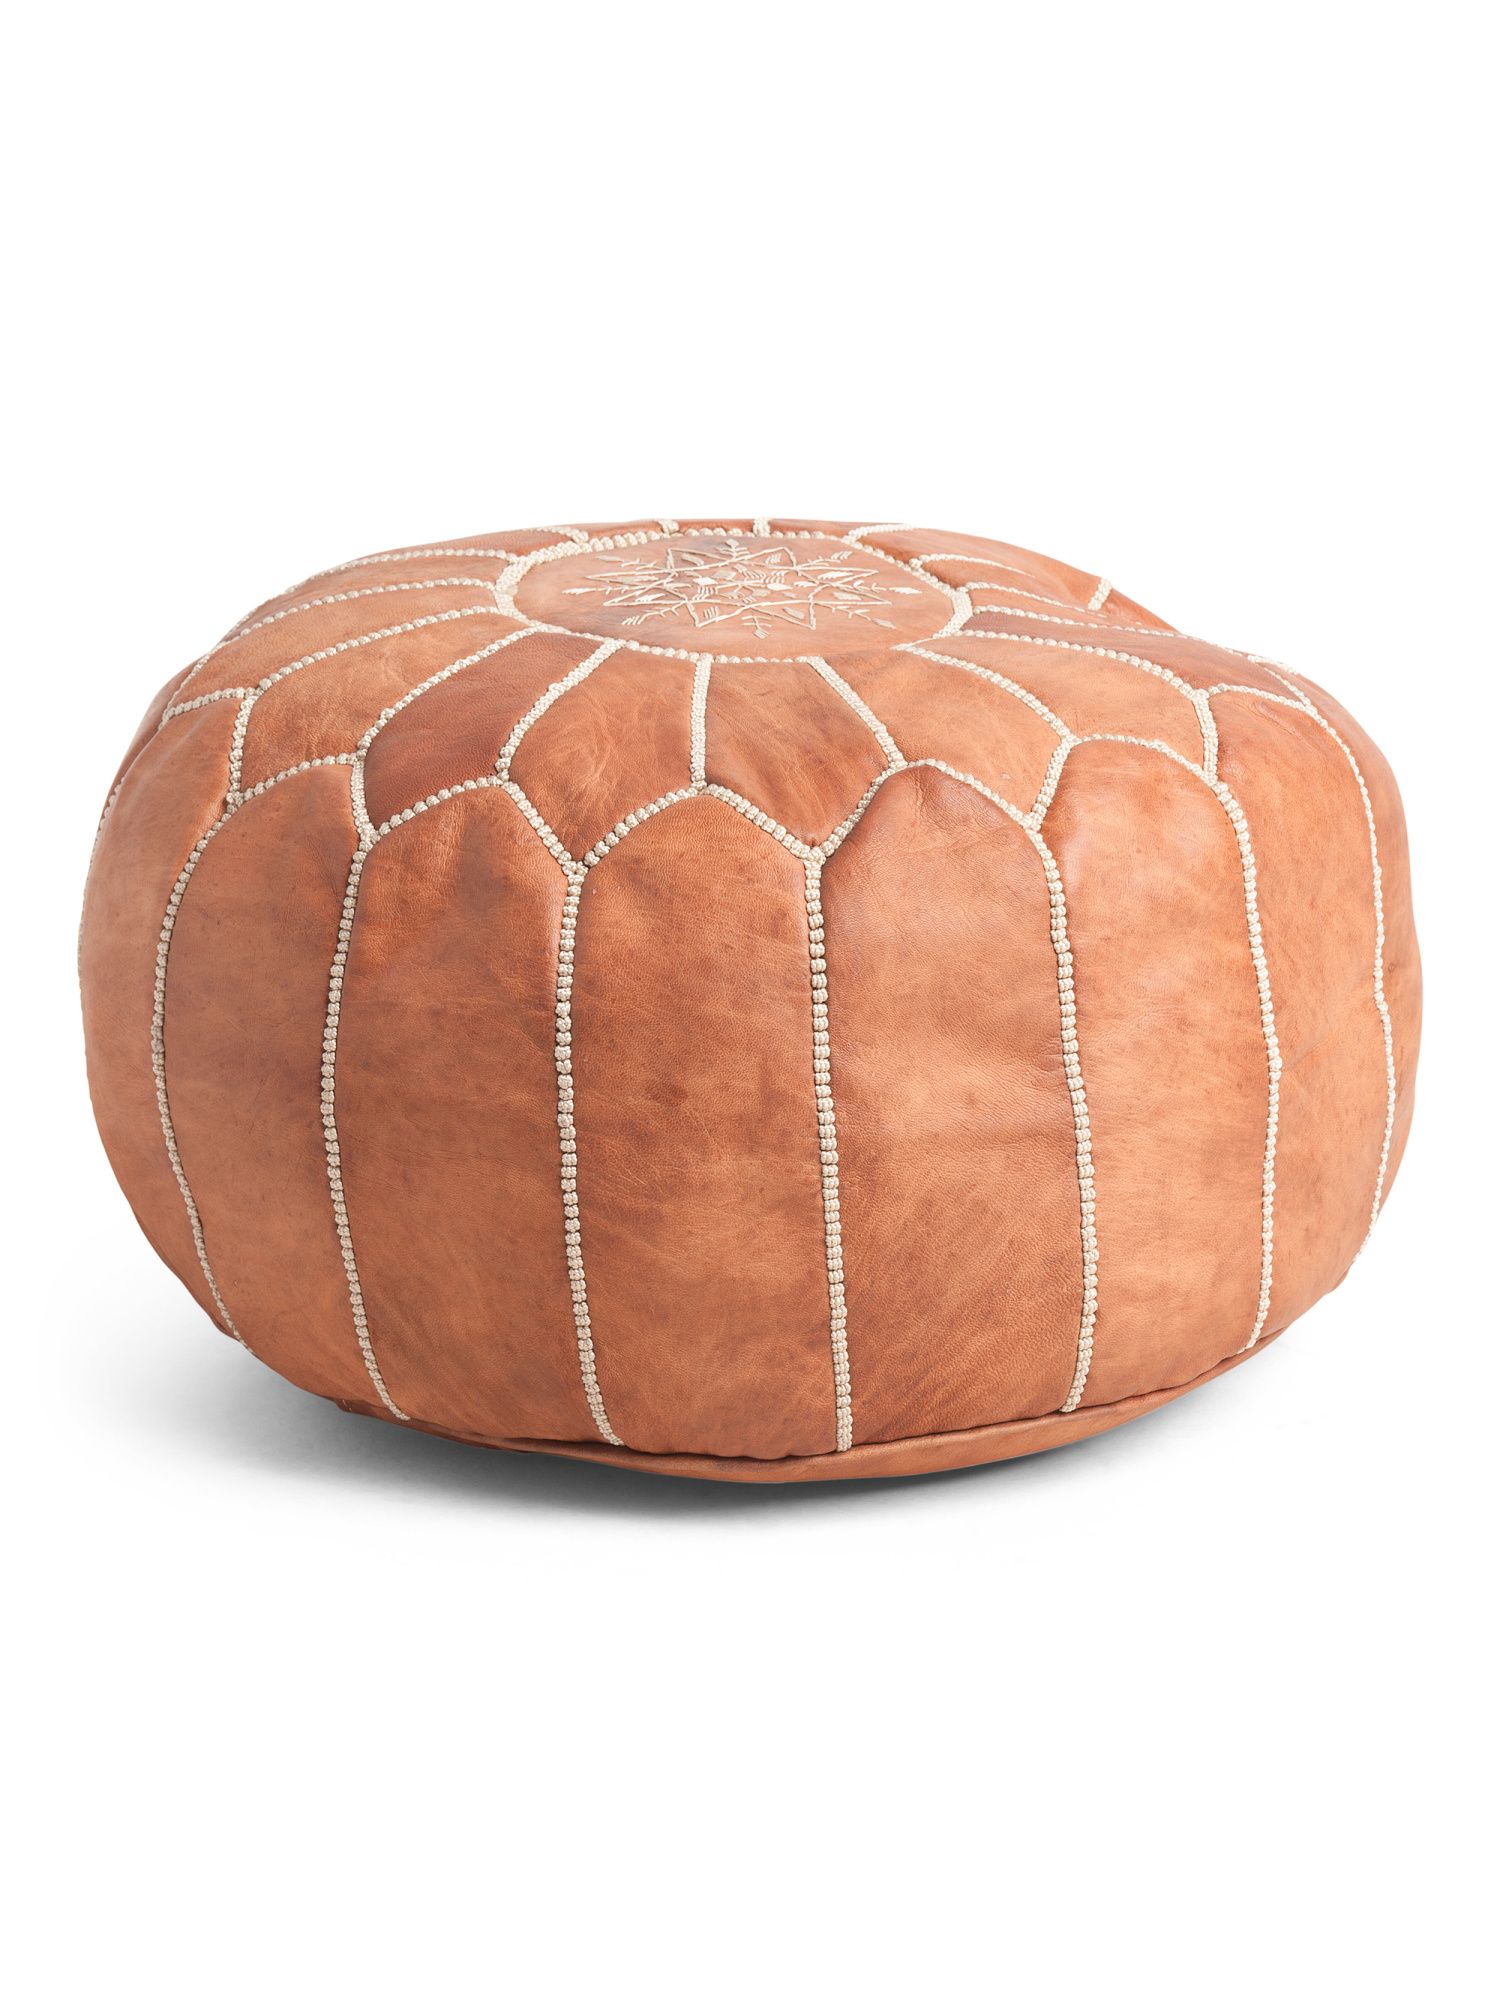 Made In Morocco Hand Stitched Leather Pouf | TJ Maxx